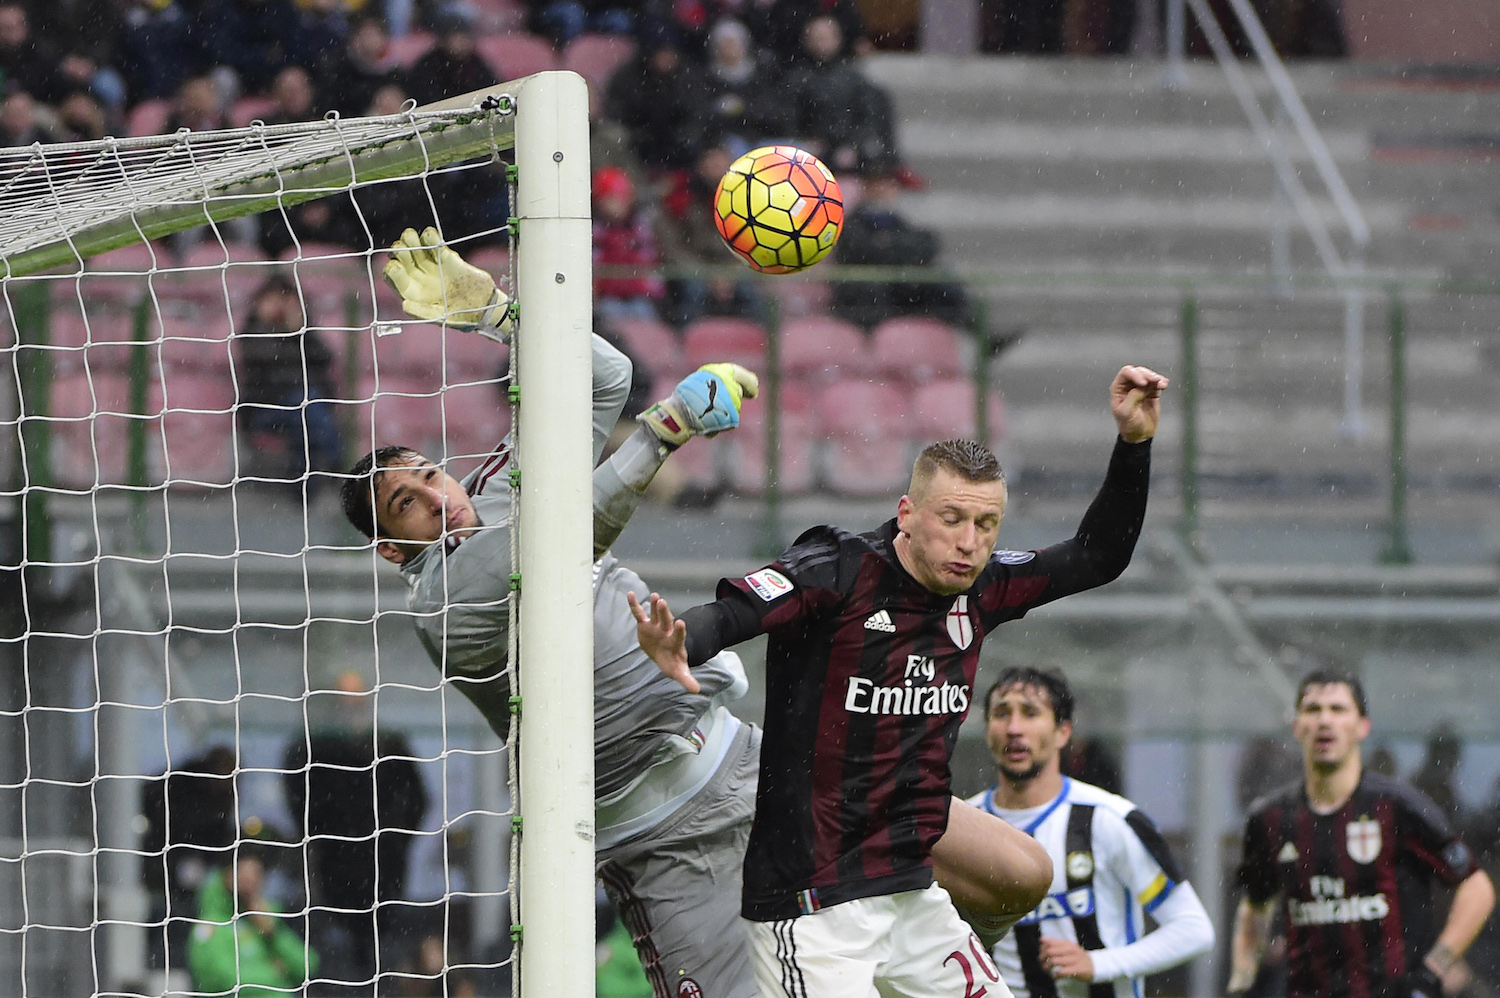 Donnarumma in action against Udinese. | OLIVIER MORIN/AFP/Getty Images